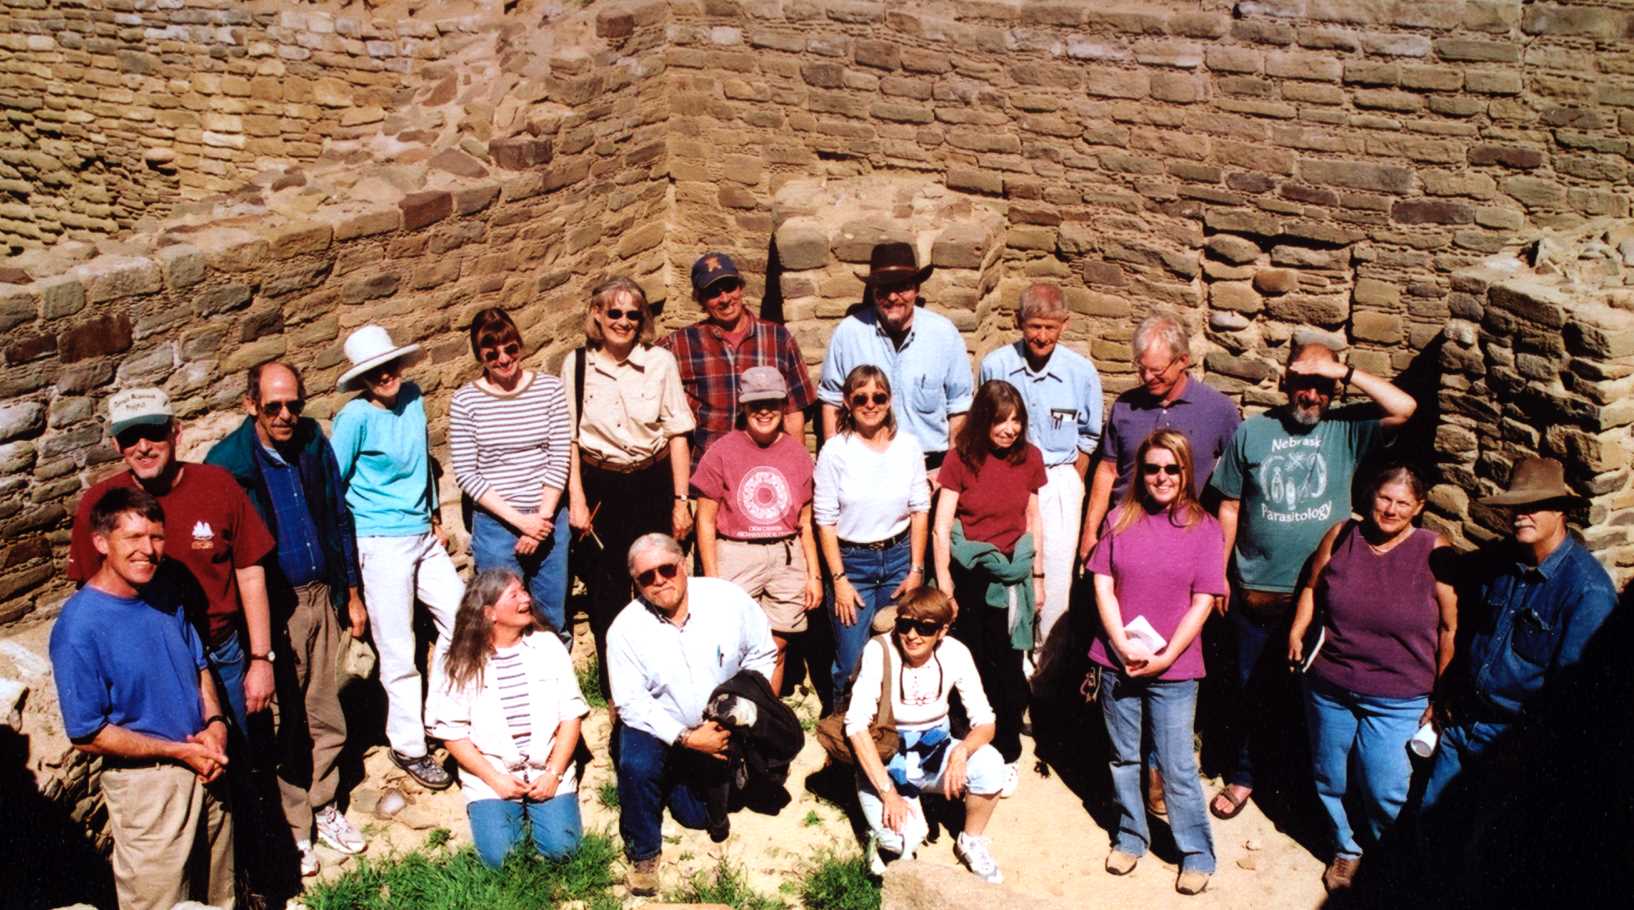 The Salmon Working Group in 2005. Gwinn is to my left in the back row. We’re both wearing light blue shirts with stuff in the pockets. Salmon’s director, Larry Baker, is kneeling in the front.